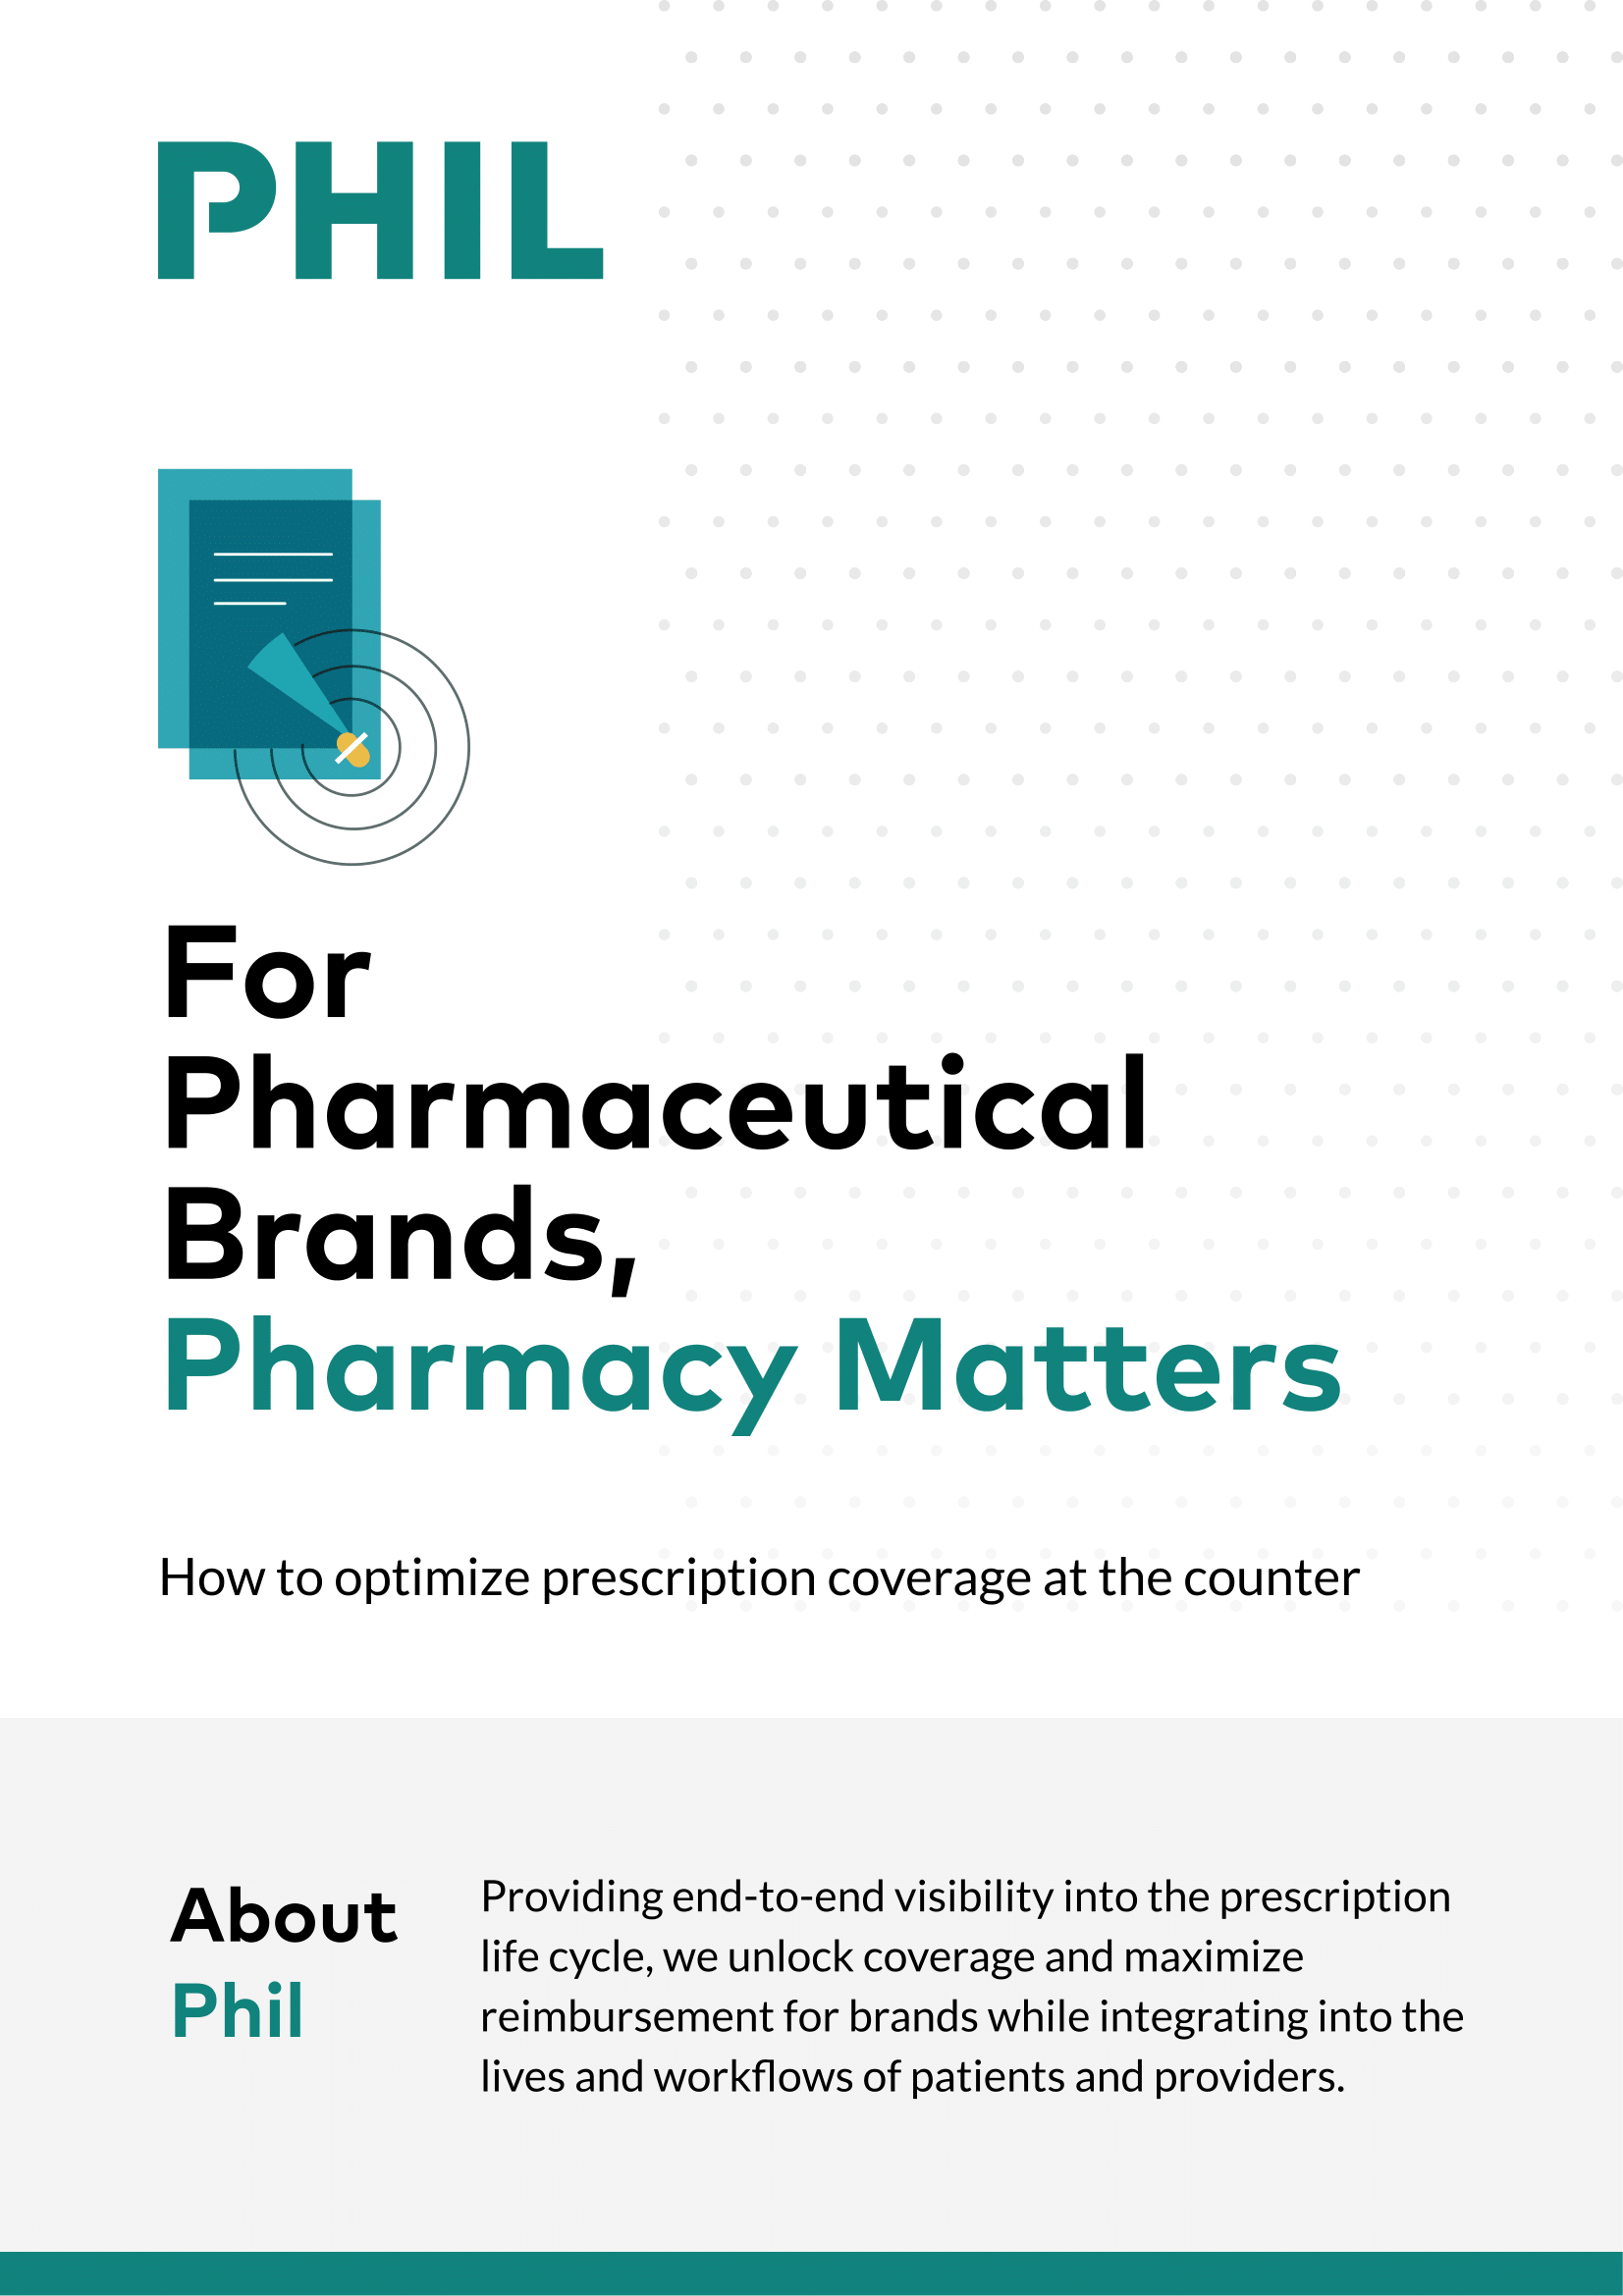 Phil Inc - The Pharmacy Matters - White Paper -01